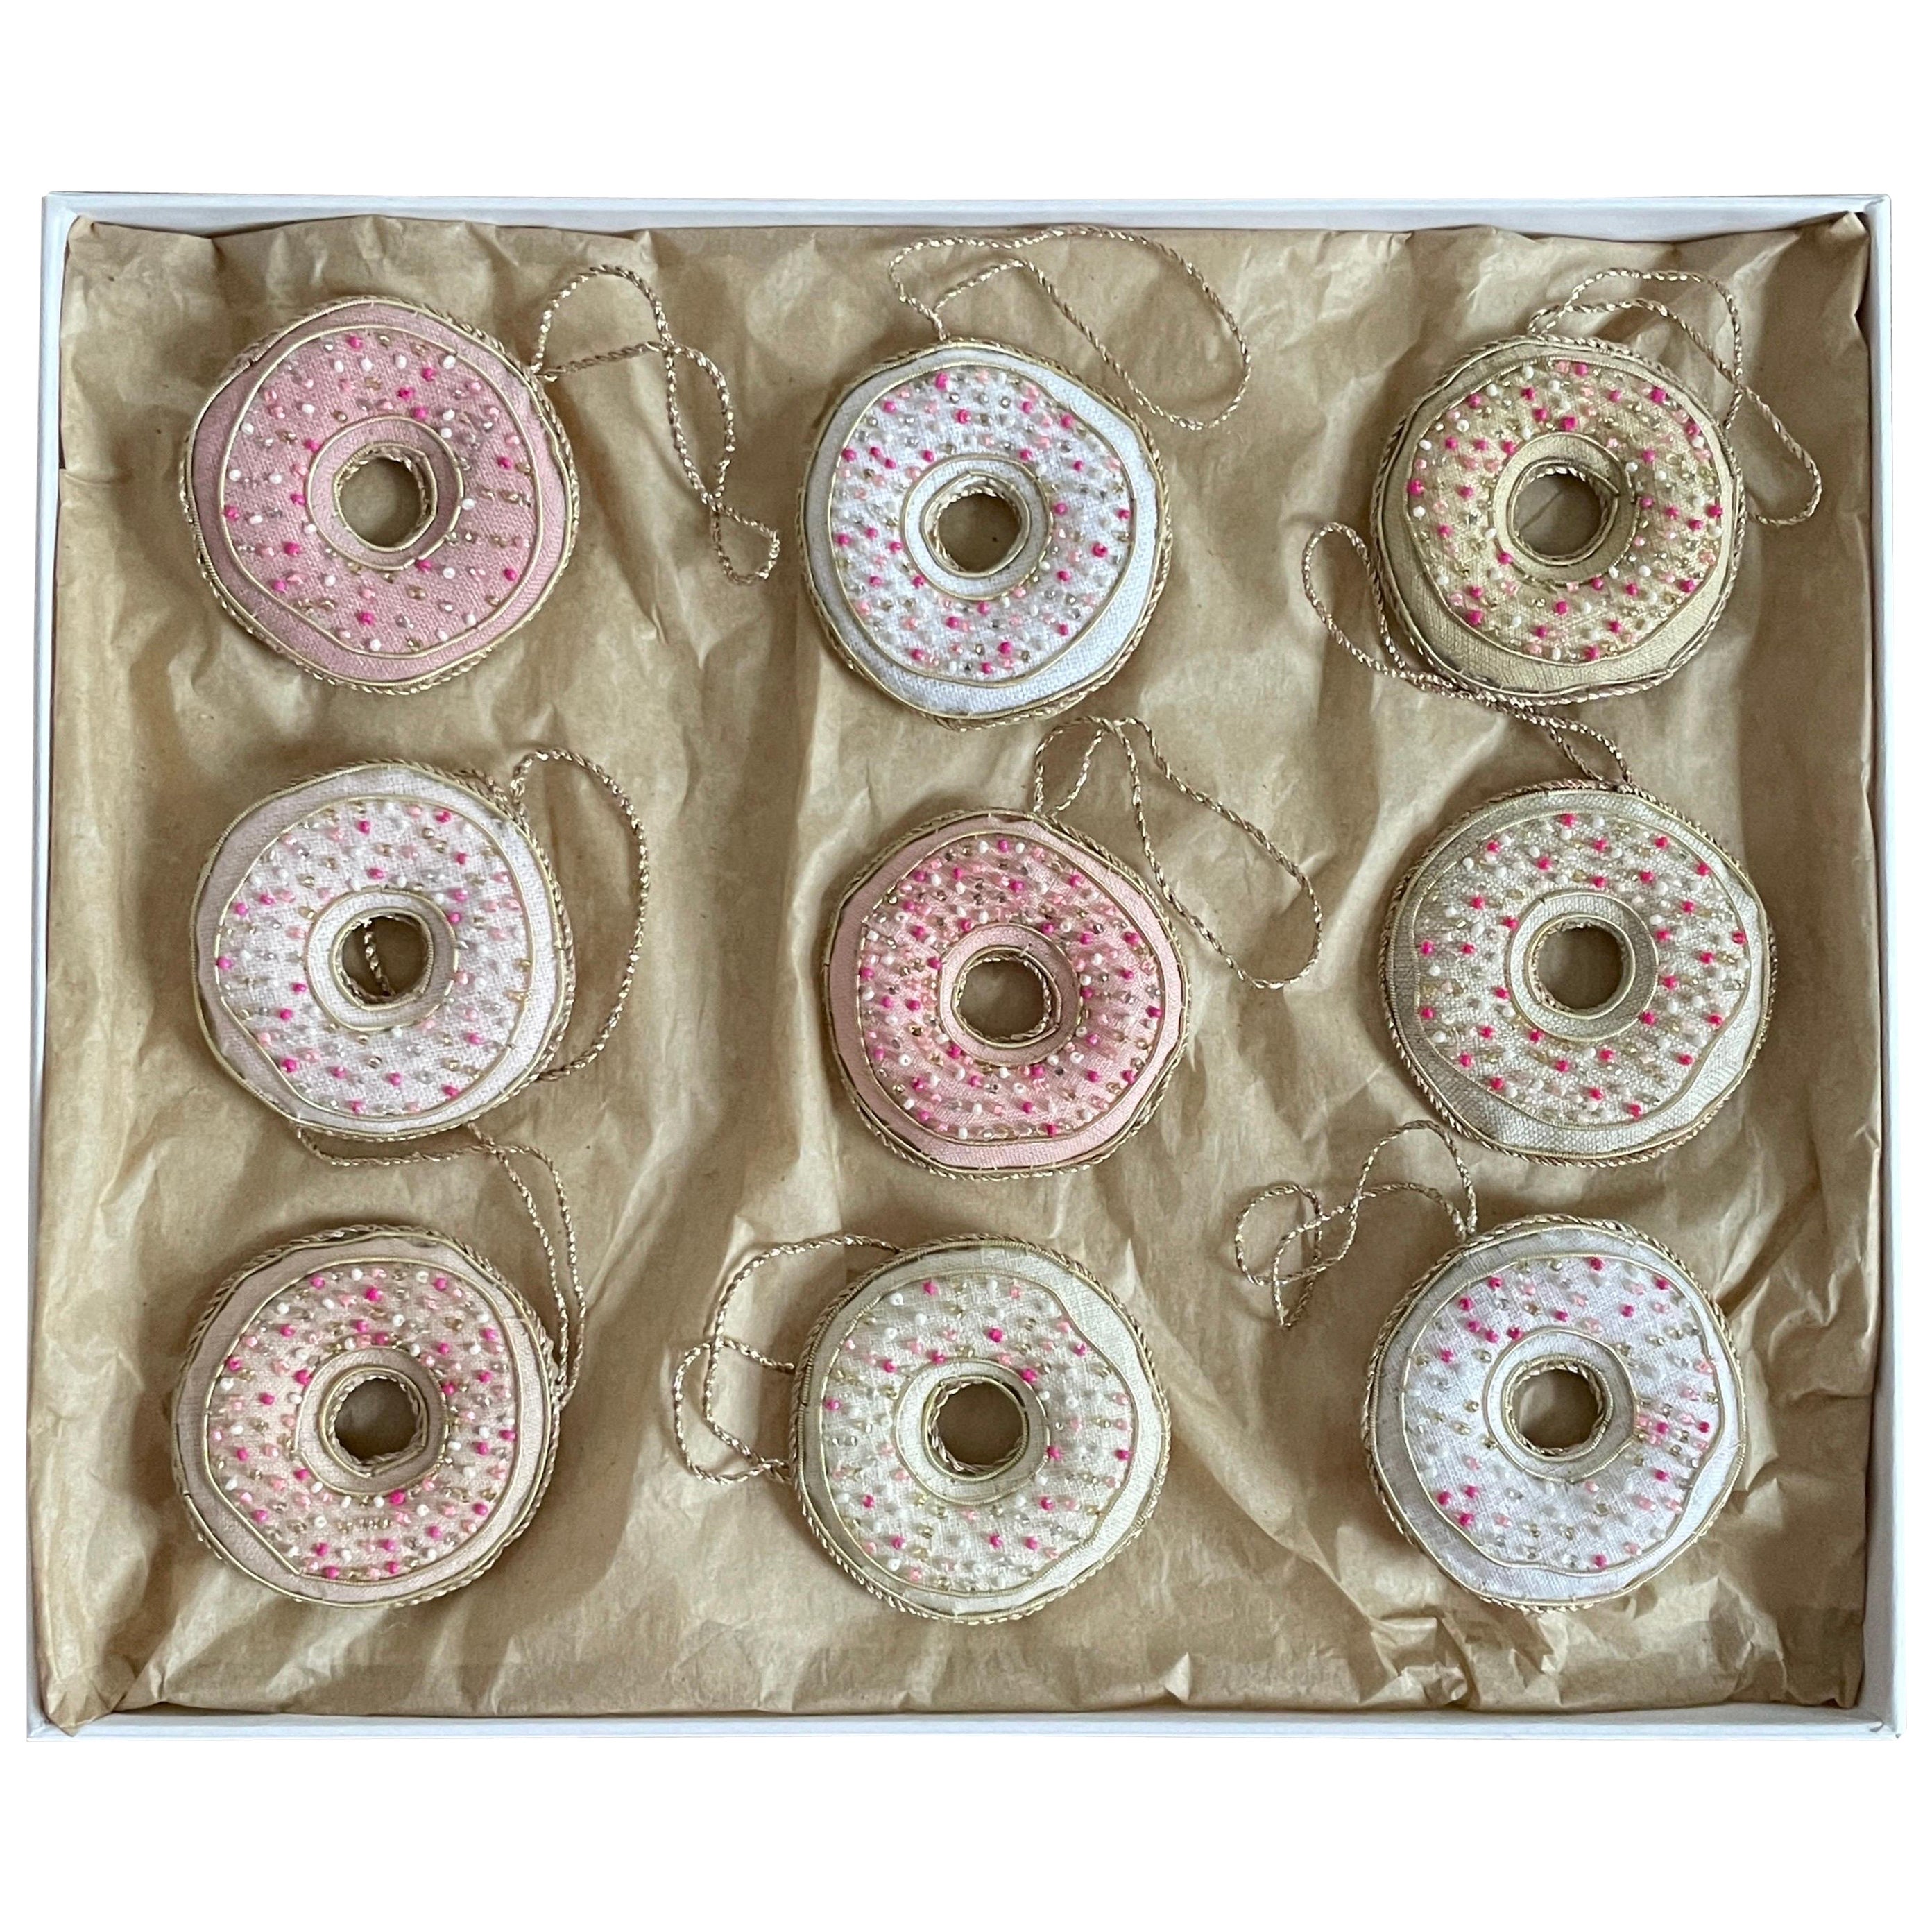 Set of 9 Limited Edition Artisan Irish Linen Donut ornaments by Katie Larmour

This is a luxury box set of artisan made decorative ornaments created with authentic Irish Linen, exclusive to 1stdibs. They are special because they are limited editions